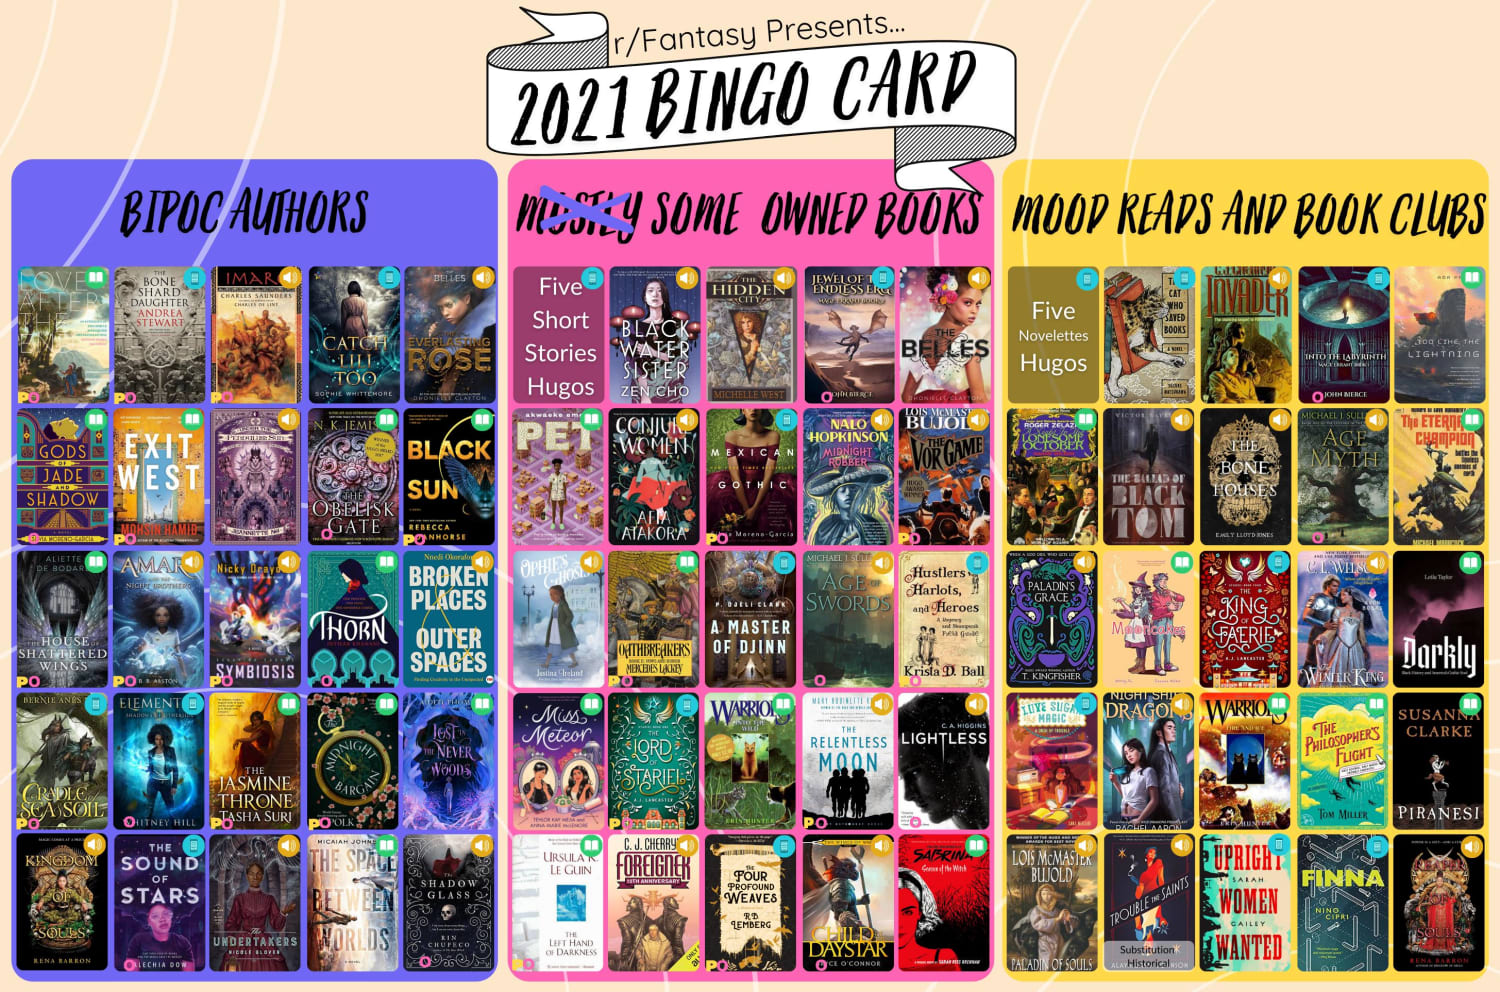 My Bingo wrap-up! 3 cards: BIPOC authors, some owned books and mood reads, with stats and thoughts and such